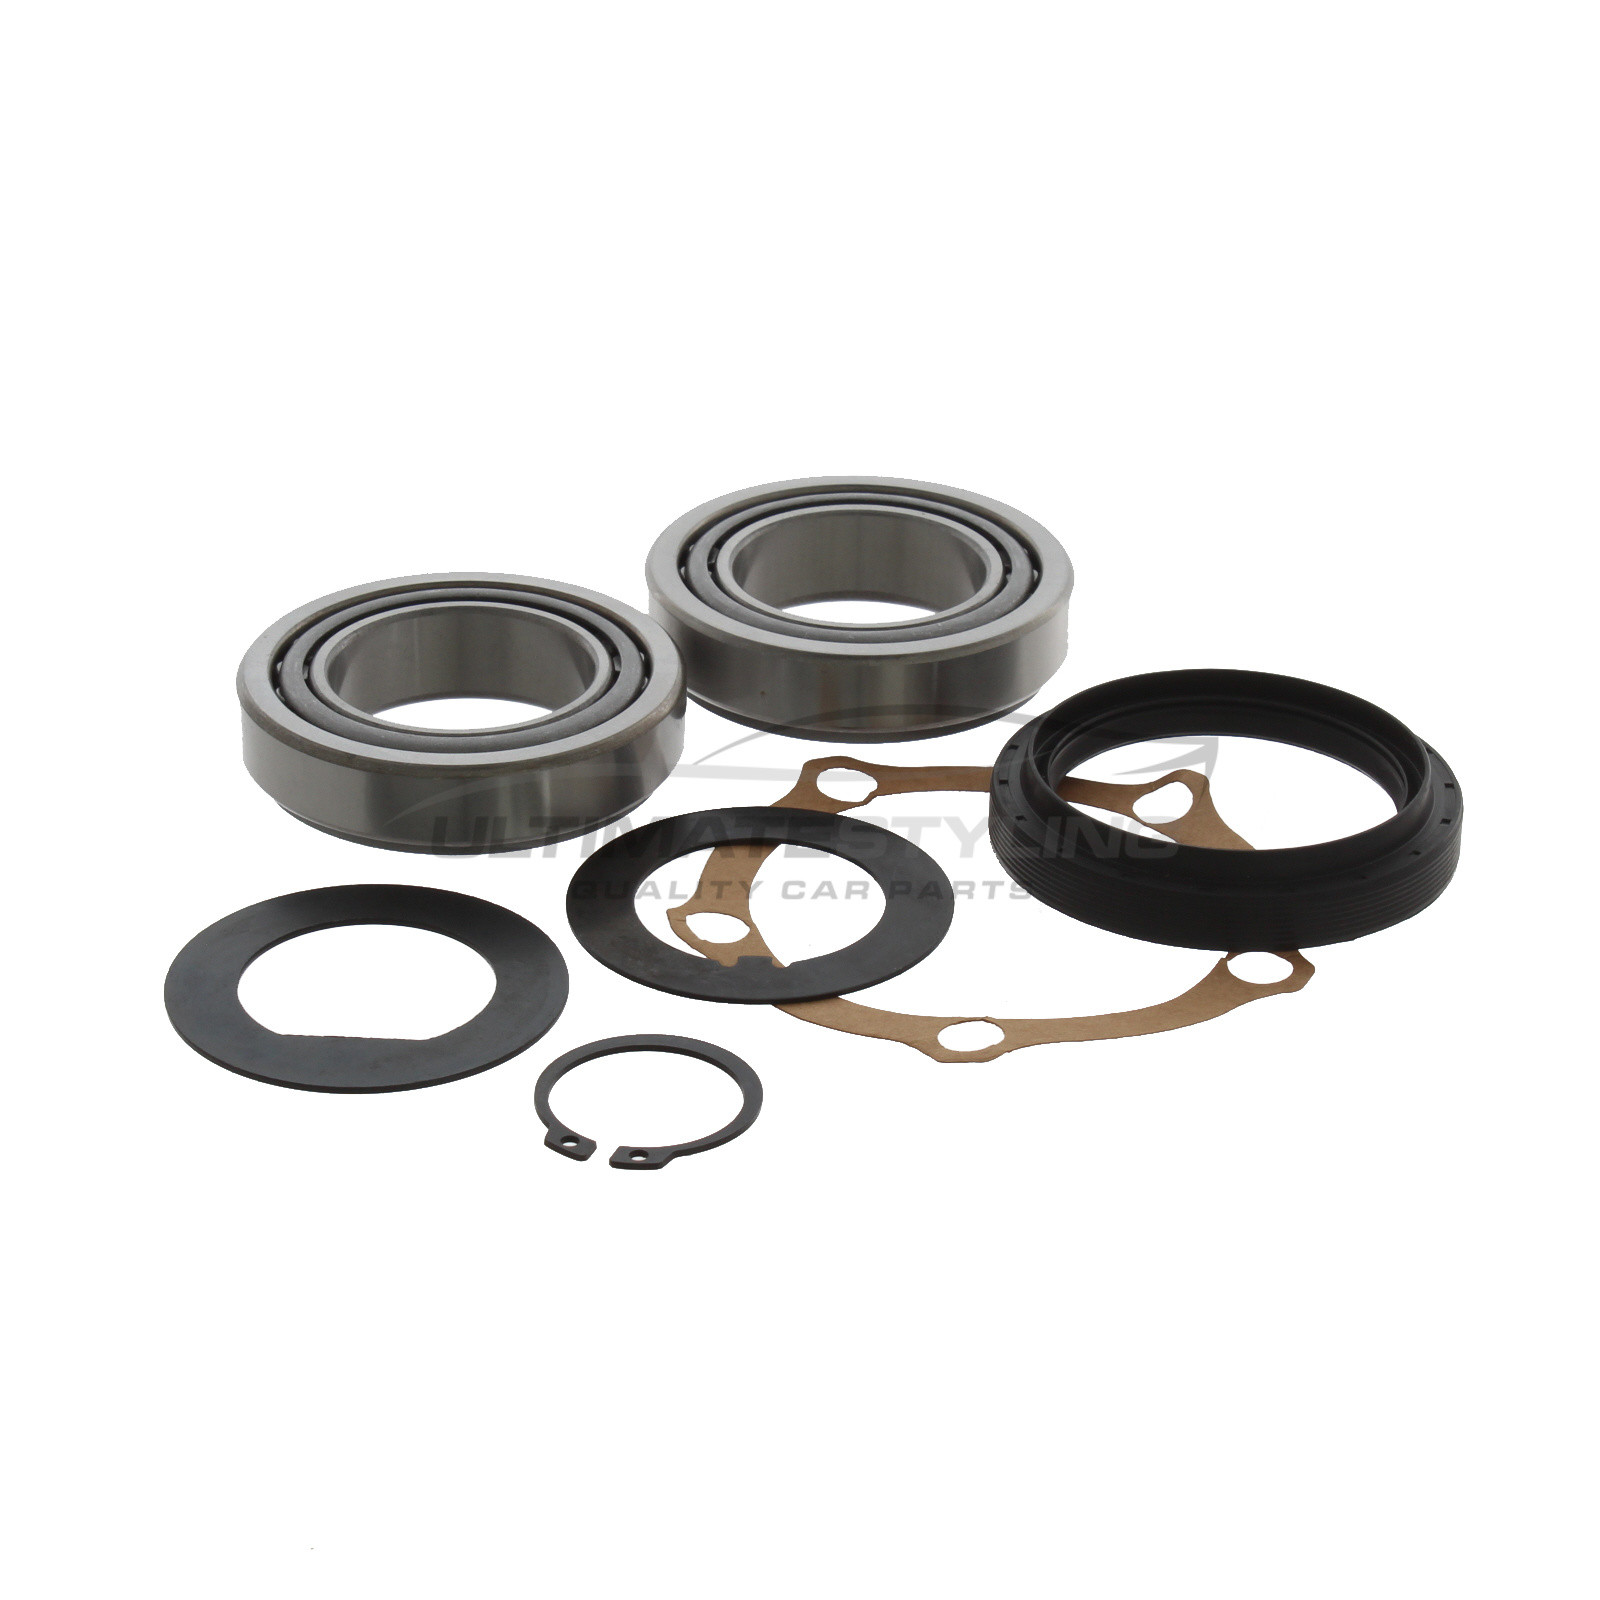 Front <span style="color:red;"><strong>OR</strong></span> Rear Wheel Bearing Kit for Land Rover Defender